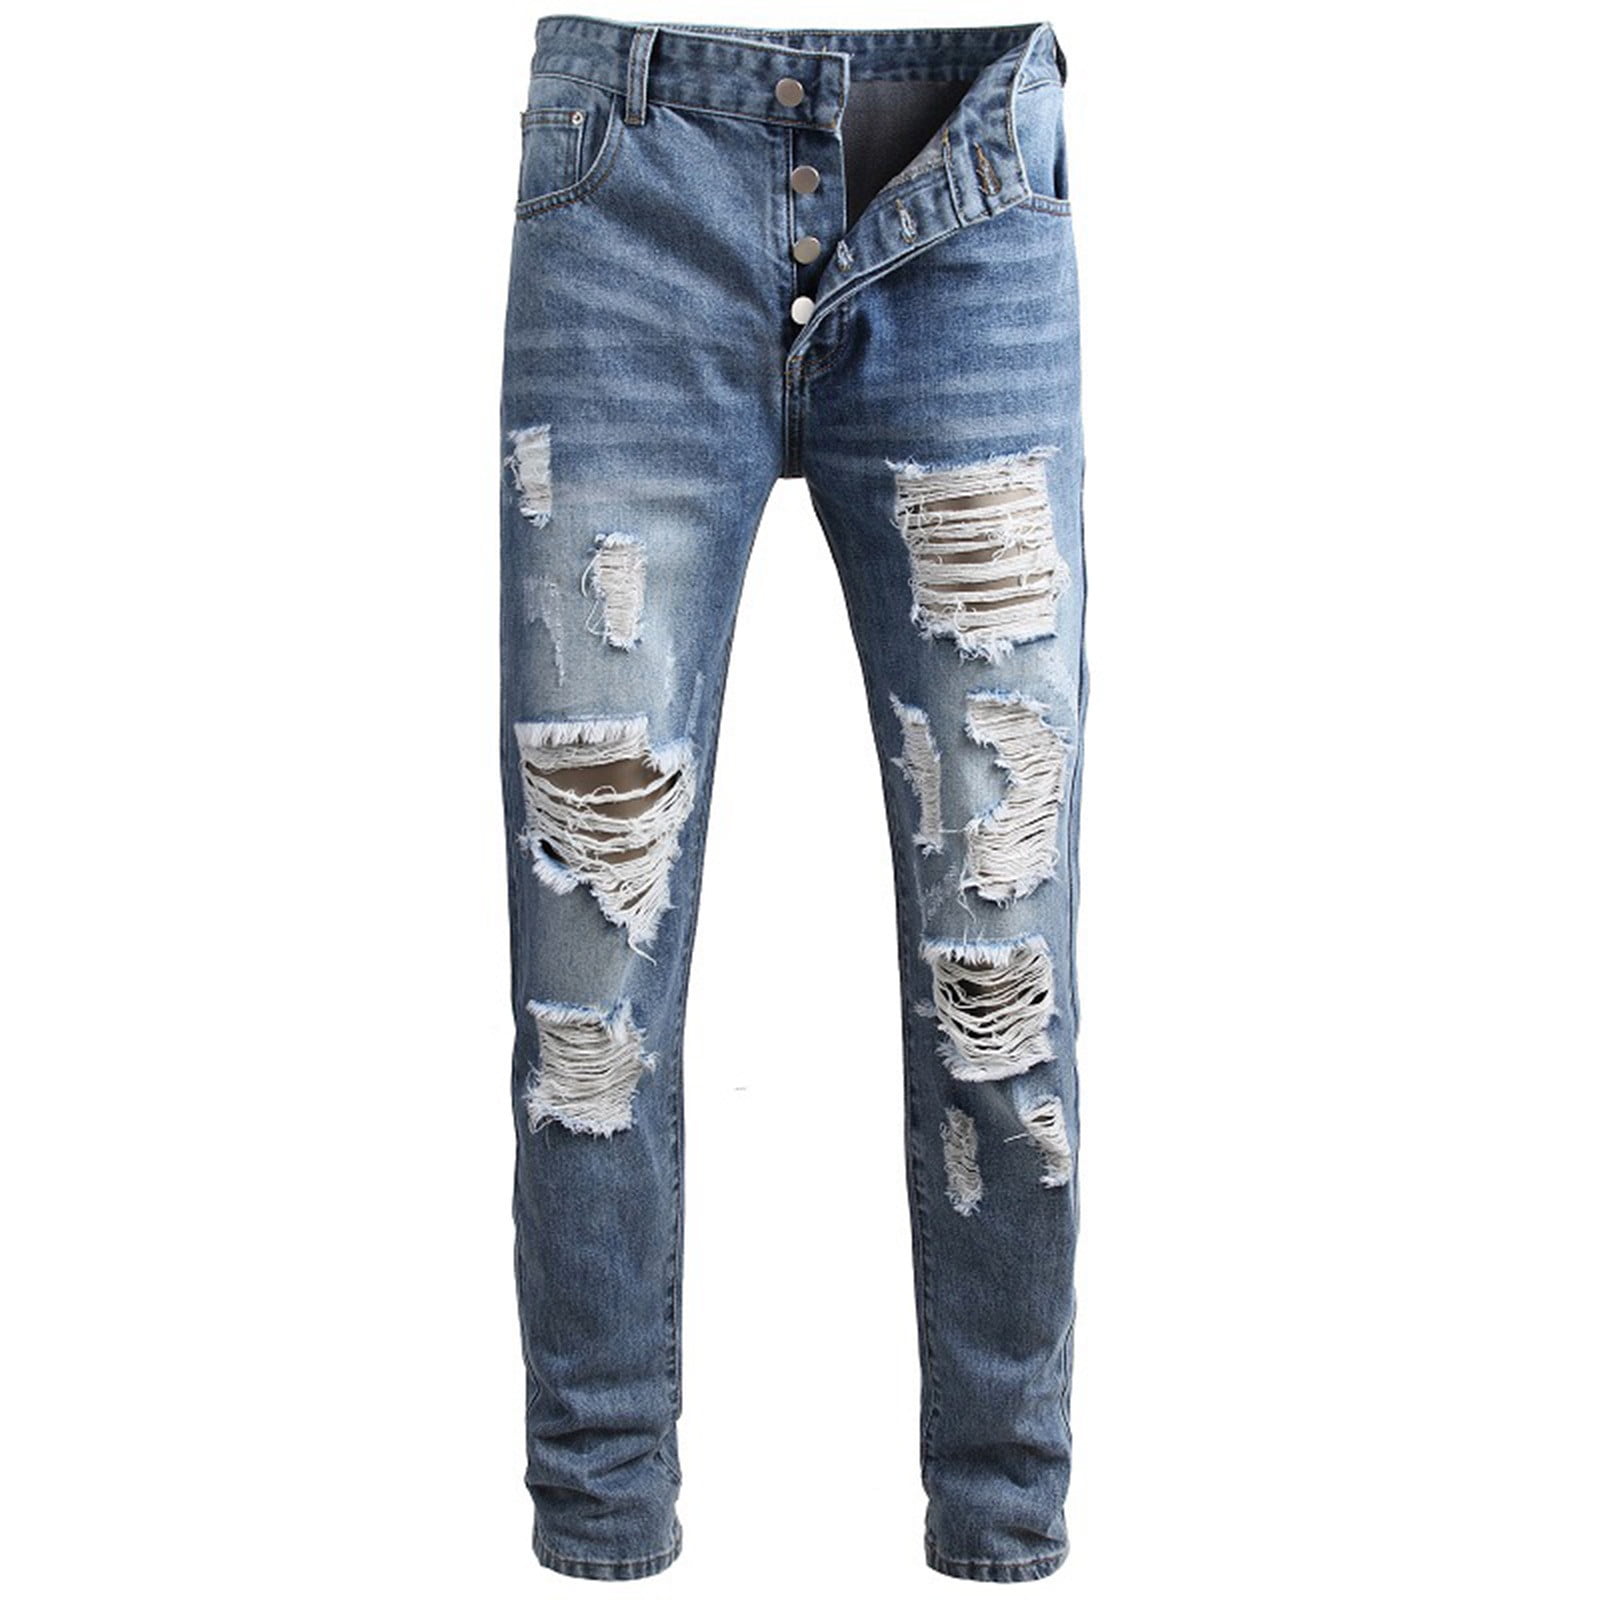 Land of Nostalgia Men's Skinny Ripped Beggar Patches Pencil Jeans Pant